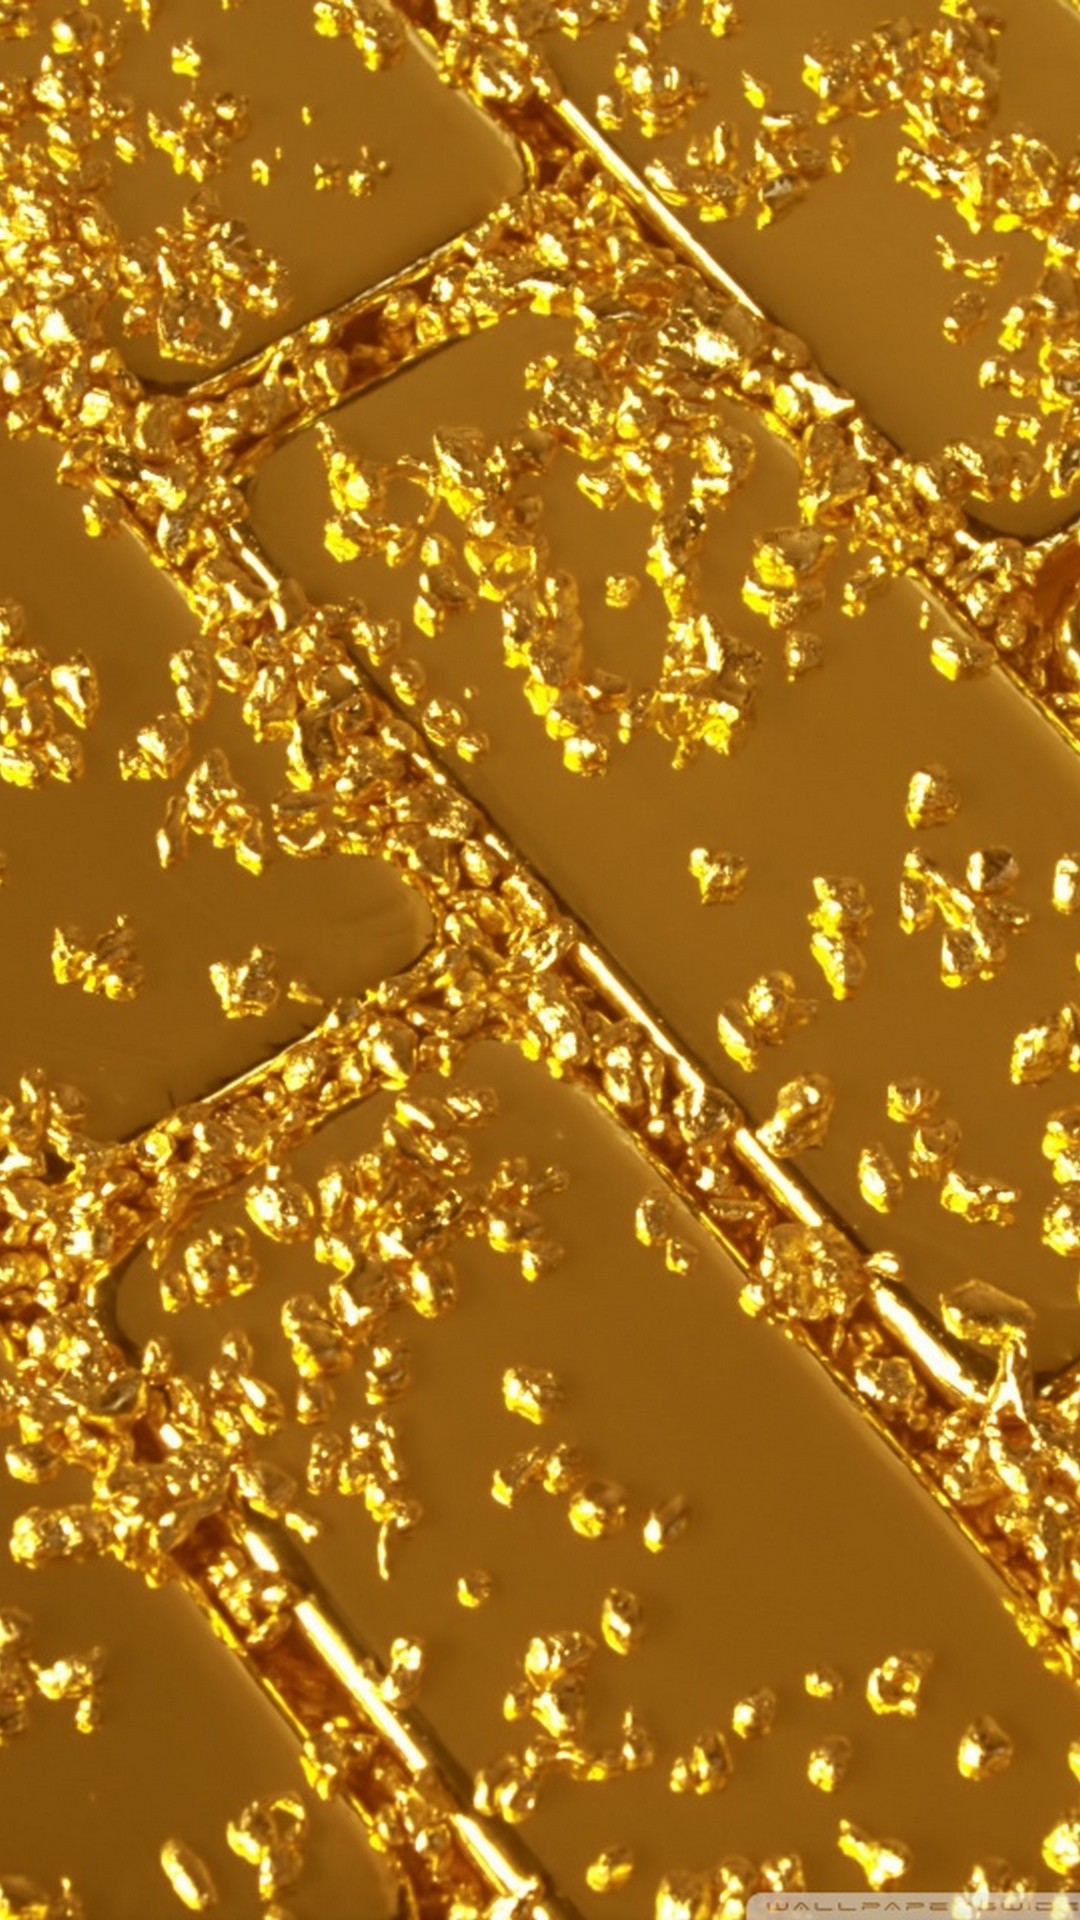 Gold Pattern Wallpaper Android with HD resolution 1080x1920